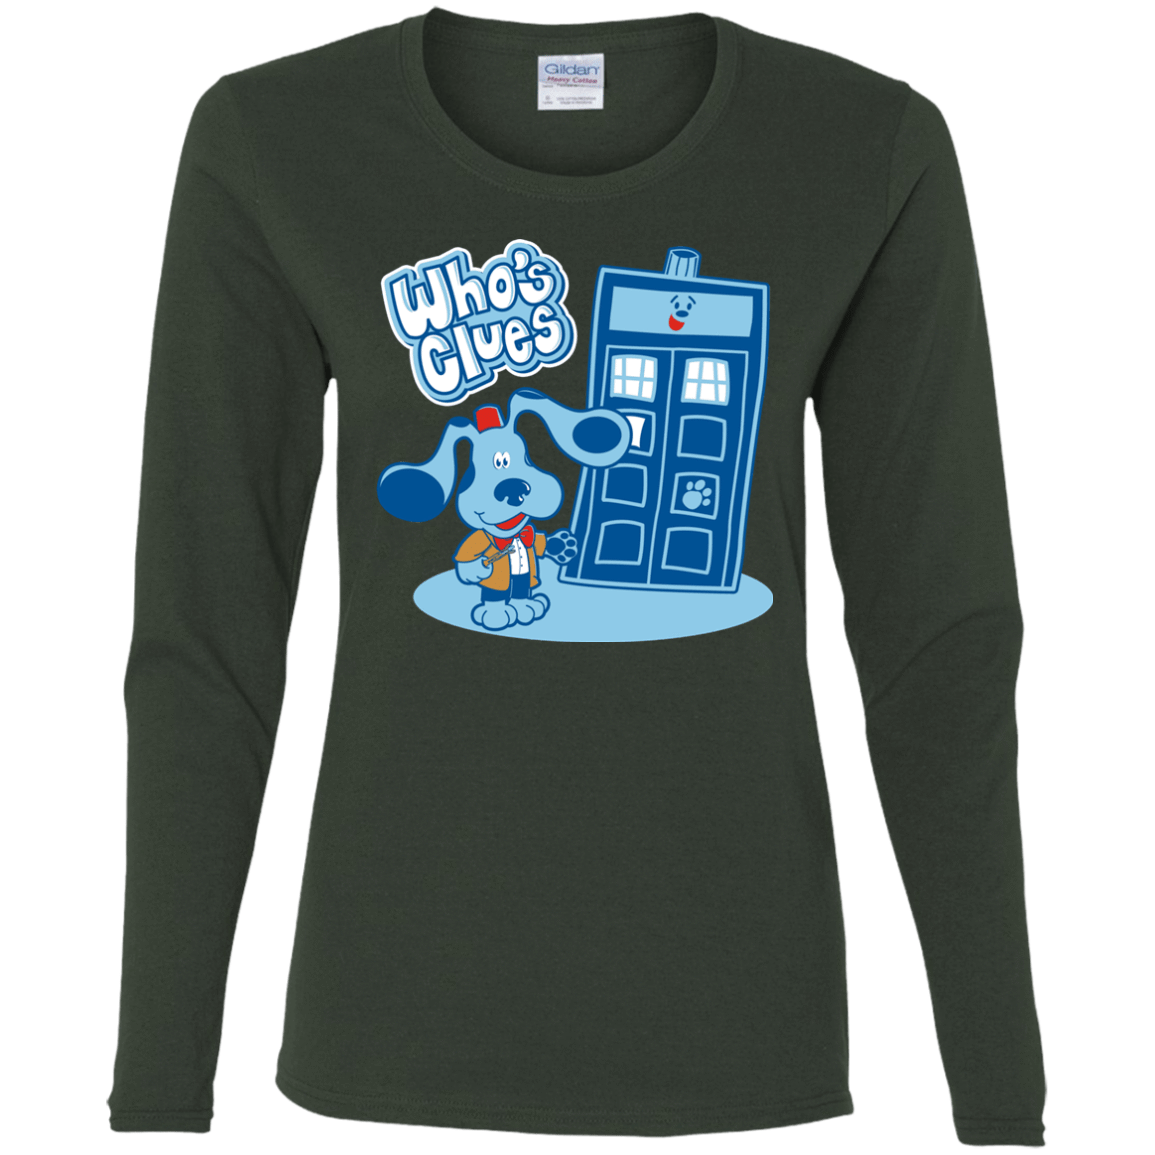 T-Shirts Forest / S Who's Clues Women's Long Sleeve T-Shirt